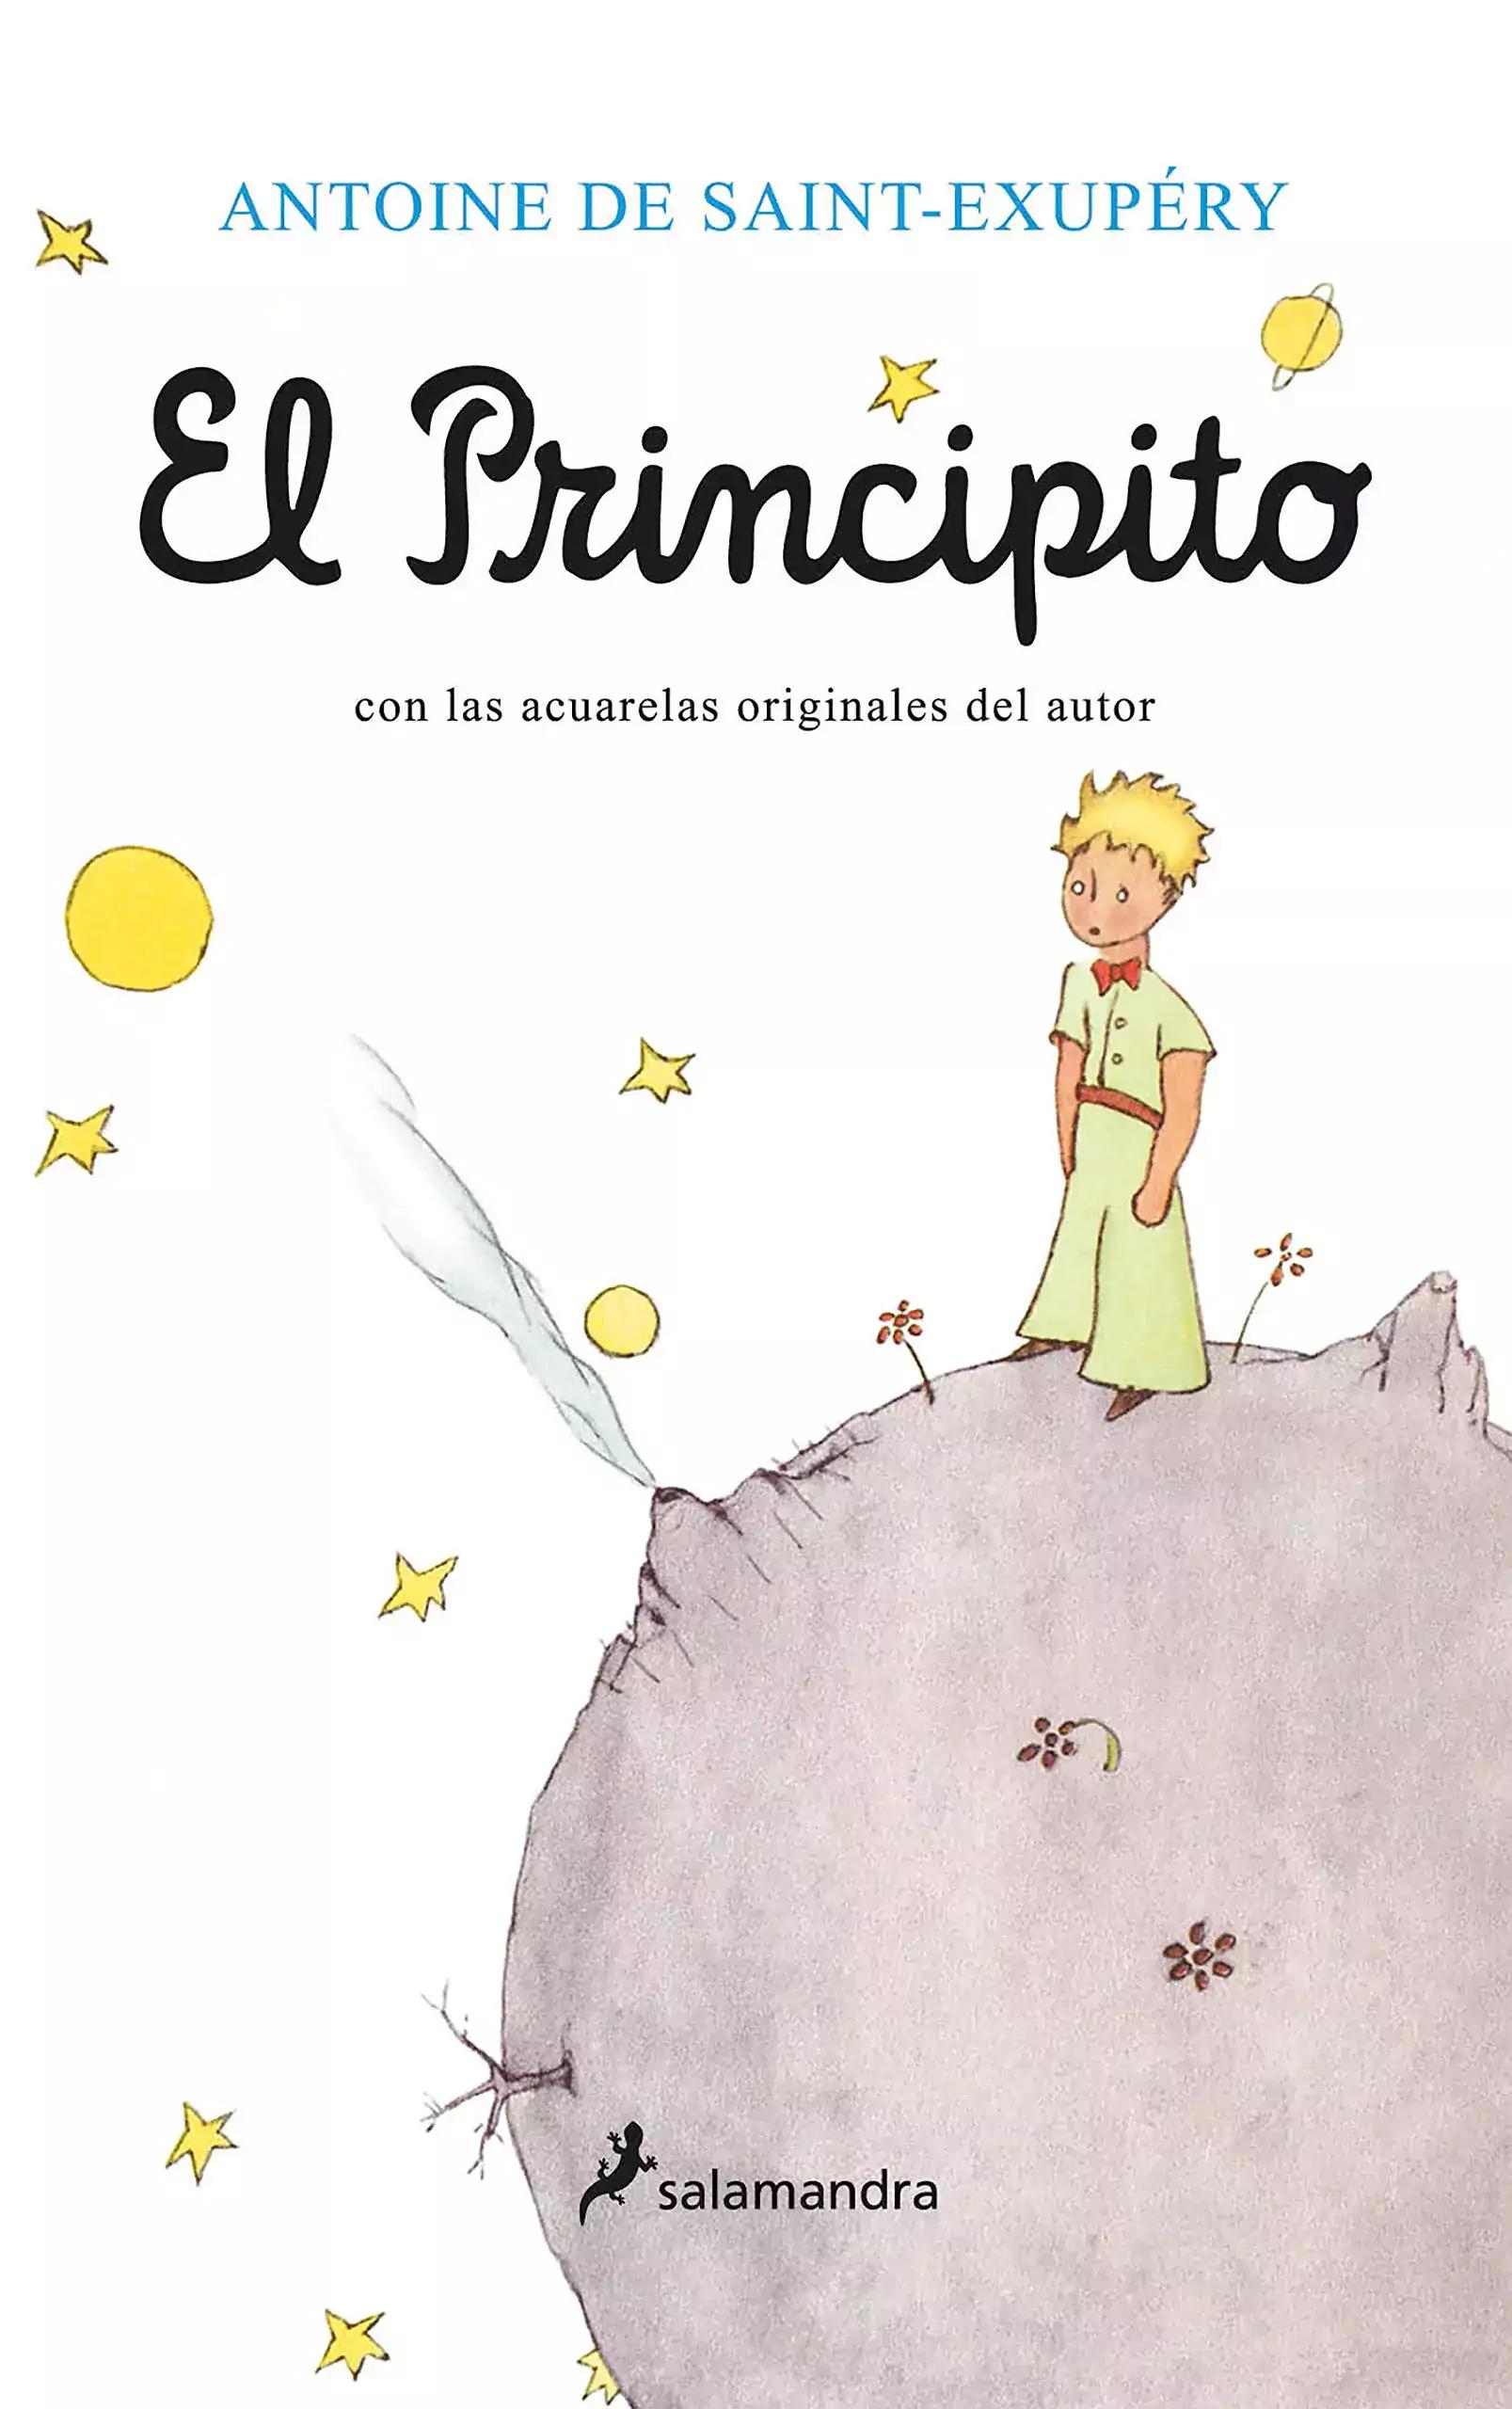 "The Little Prince" by Antoine de Saint-Exupéry - 8 to 12 years old